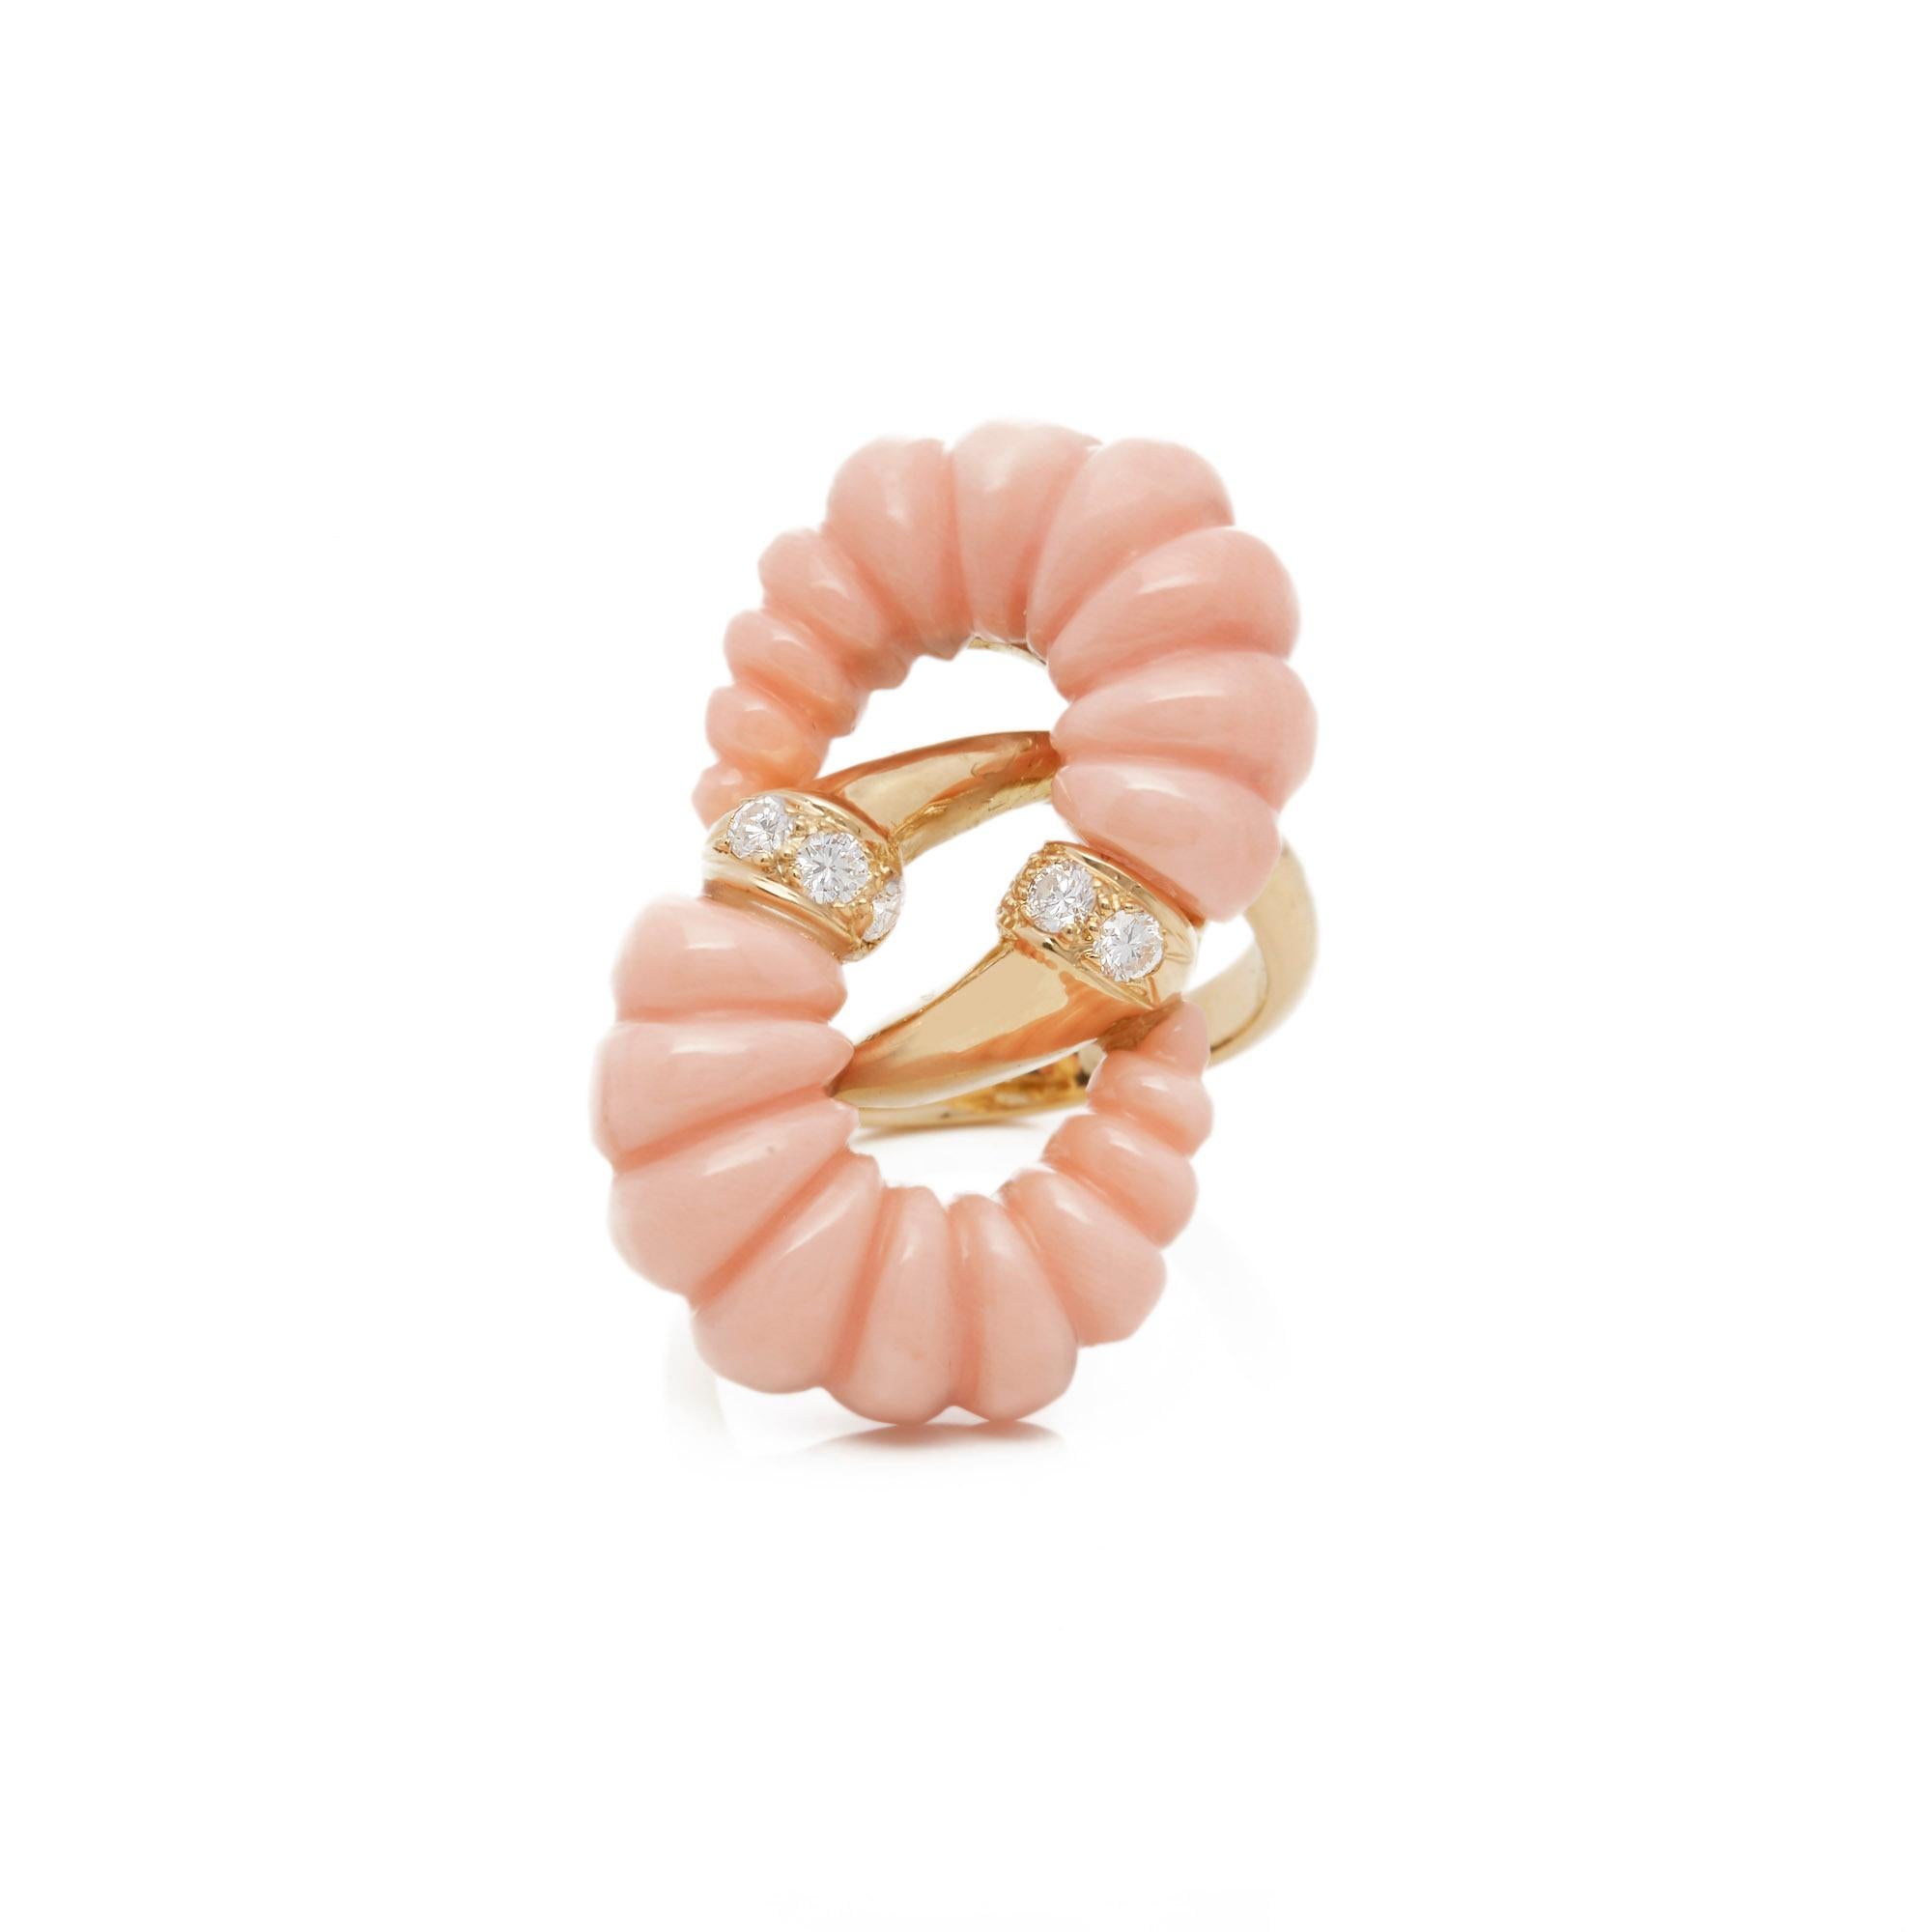 This Ring by Van Cleef and Arpels features two Carved Graduated Pink Coral sections with six Round Brilliant Cut Diamonds mounted in an 18k Yellow Gold band. UK ring size L. EU ring size 53. US ring size 6 1/2. Complete with Van Cleef and Arpels